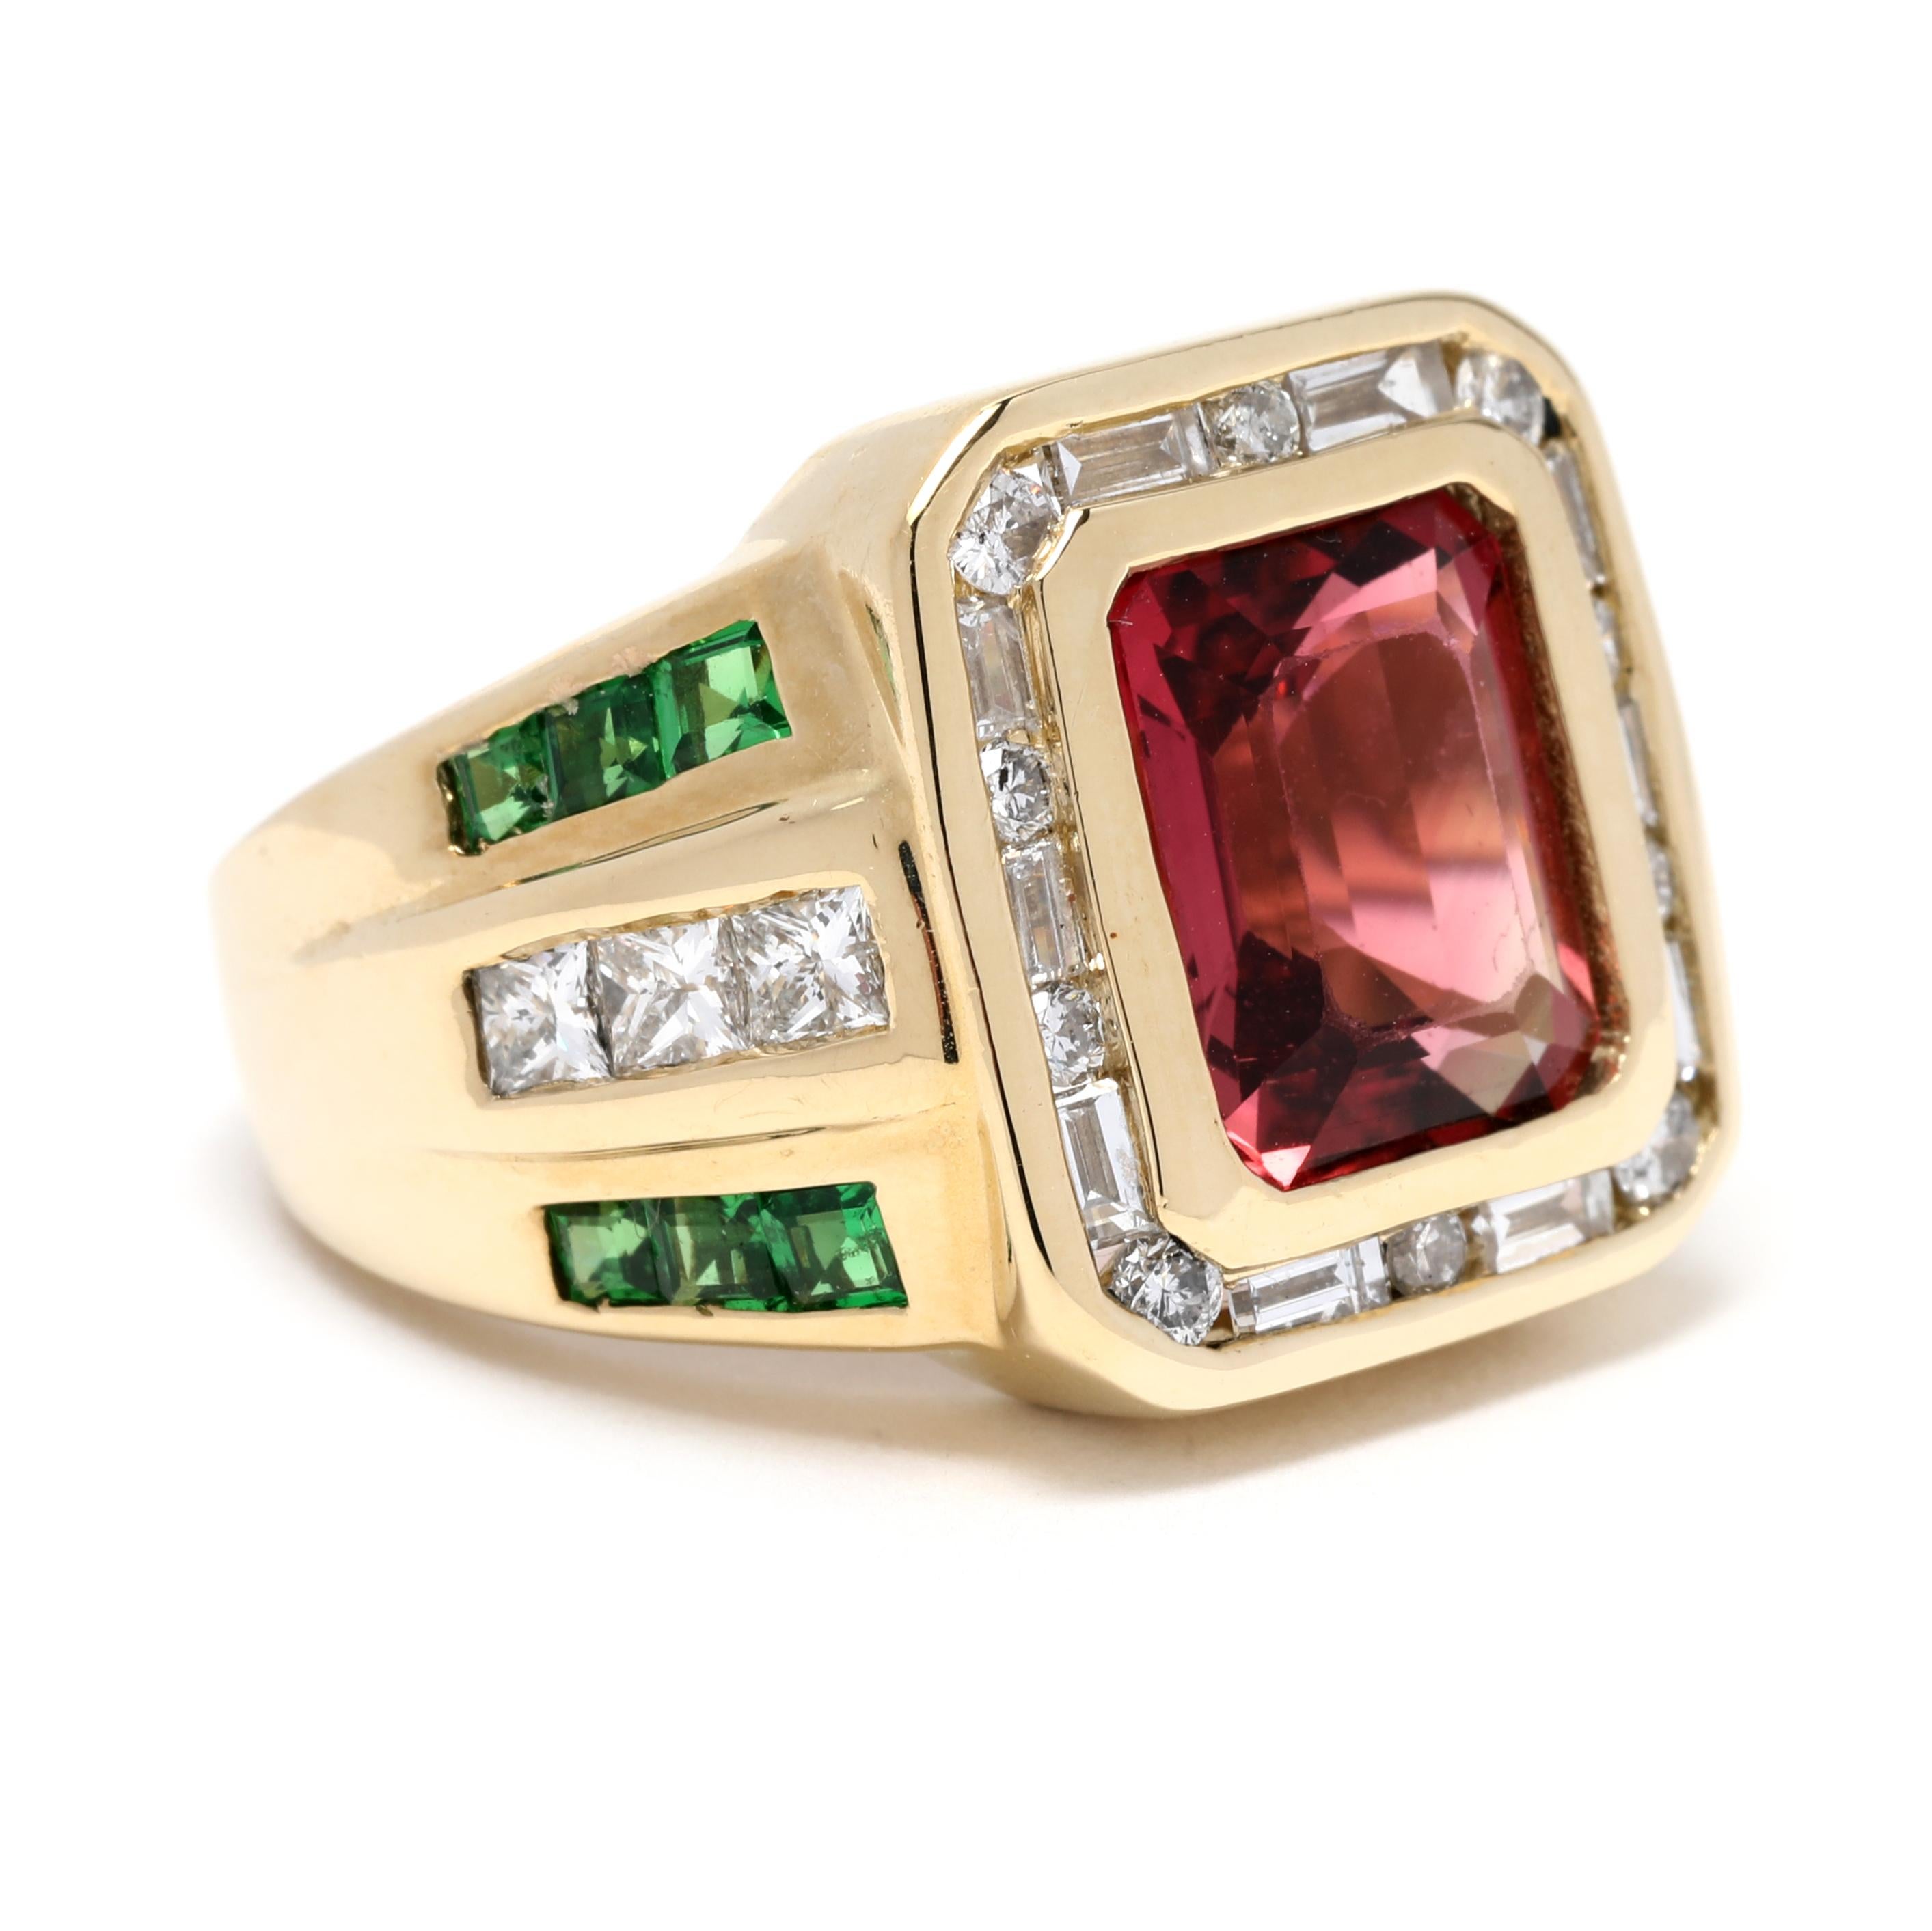 This 14K yellow gold statement ring is a one-of-a-kind piece with its unique combination of pink tourmaline, diamond, tsavorite garnet, and emerald cut. This stunning 5.5ctw ring resembles a diamond halo, with a 0.75ct pink tourmaline center stone